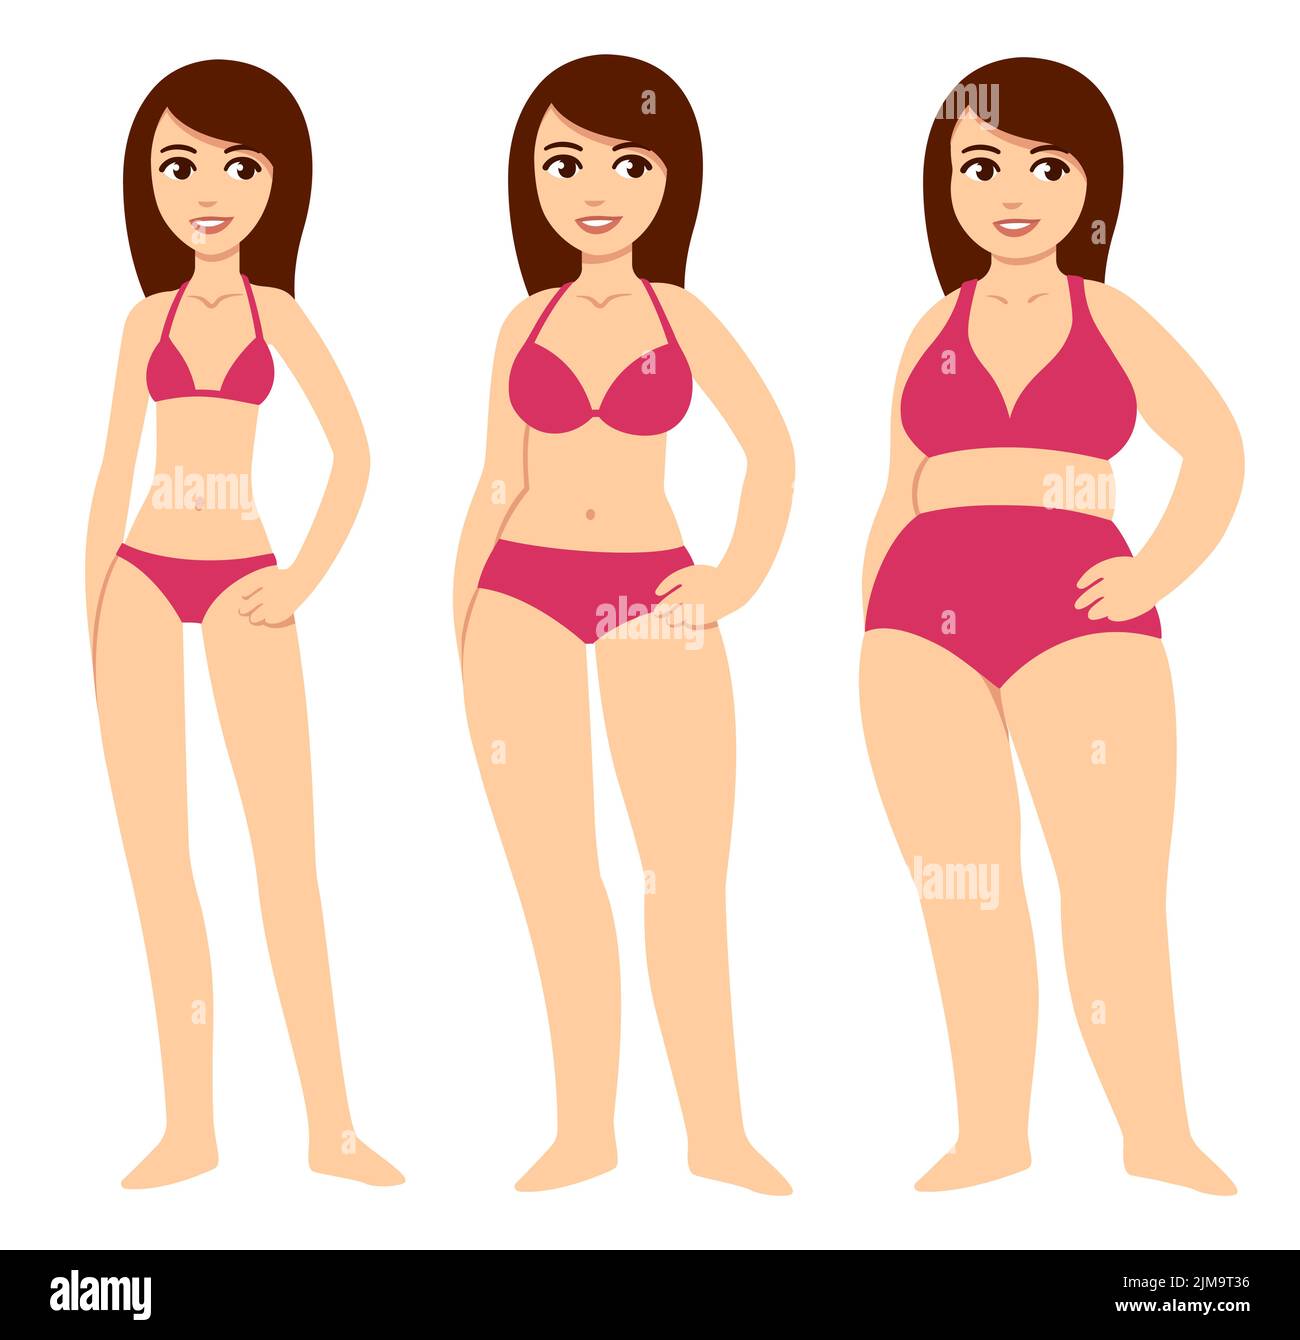 Three cartoon young women of various body types: skinny, average and chubby. Girls in red bikini with different coverage. Cute vector illustration set Stock Vector